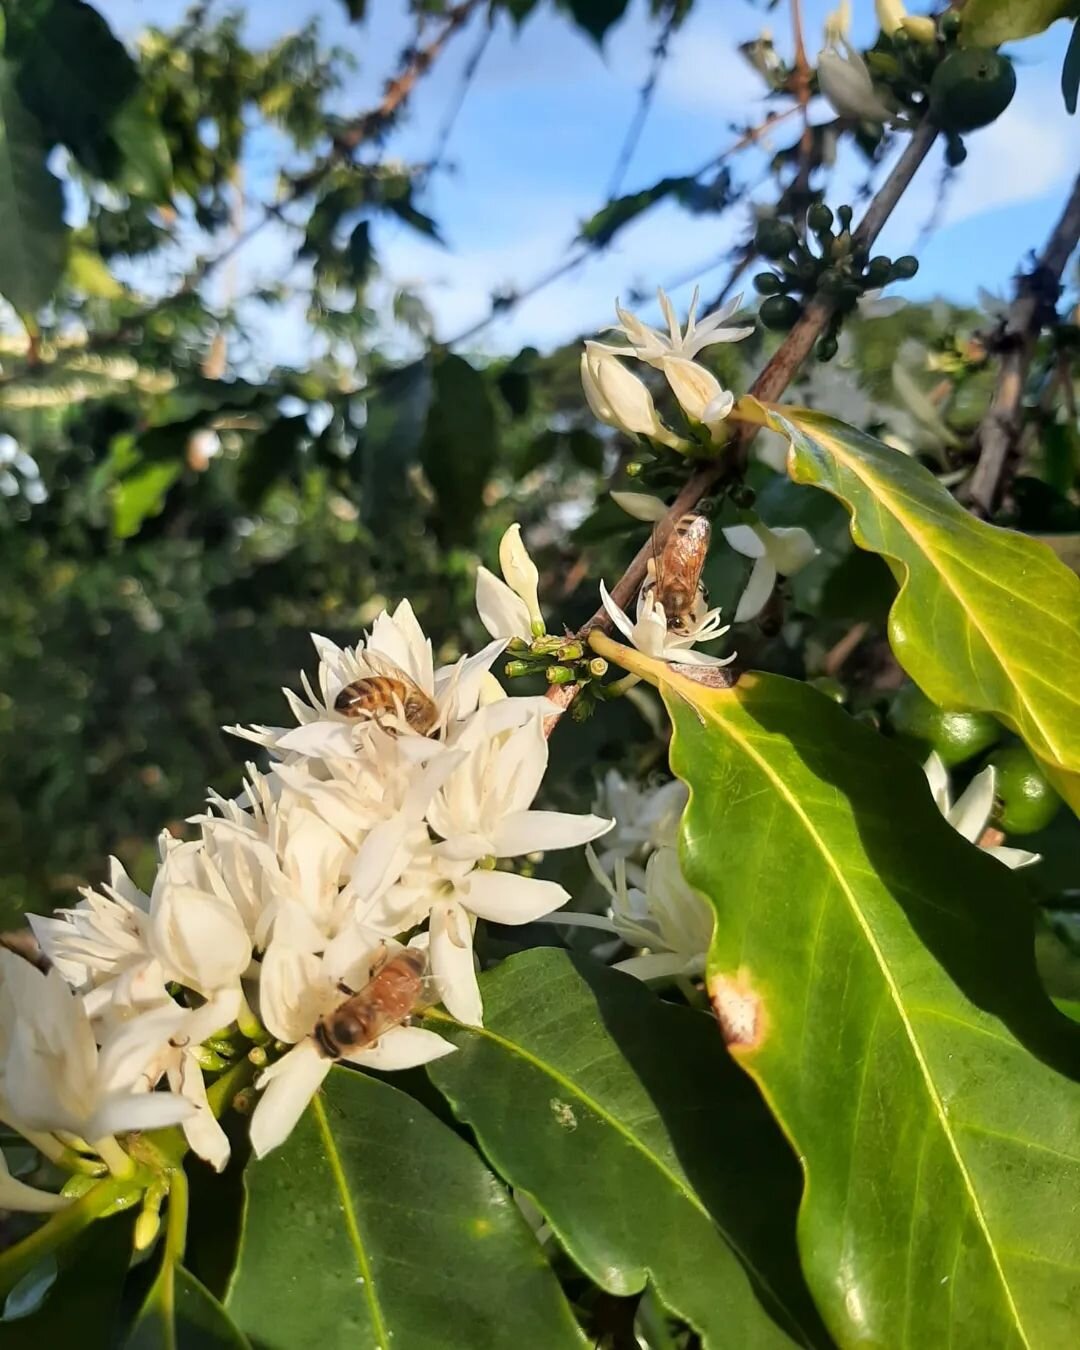 Bee-sy pollinators at work at the farm.🐝 ❤️🌱 They are doing wonders for our coffee trees!

#alohastarcoffee #alohastarcoffeefarms #konacoffee #specialtycoffee #gourmetcoffee #hawaiicoffee #kona #hawaii #bees #pollination #pollinators #coffeetrees #